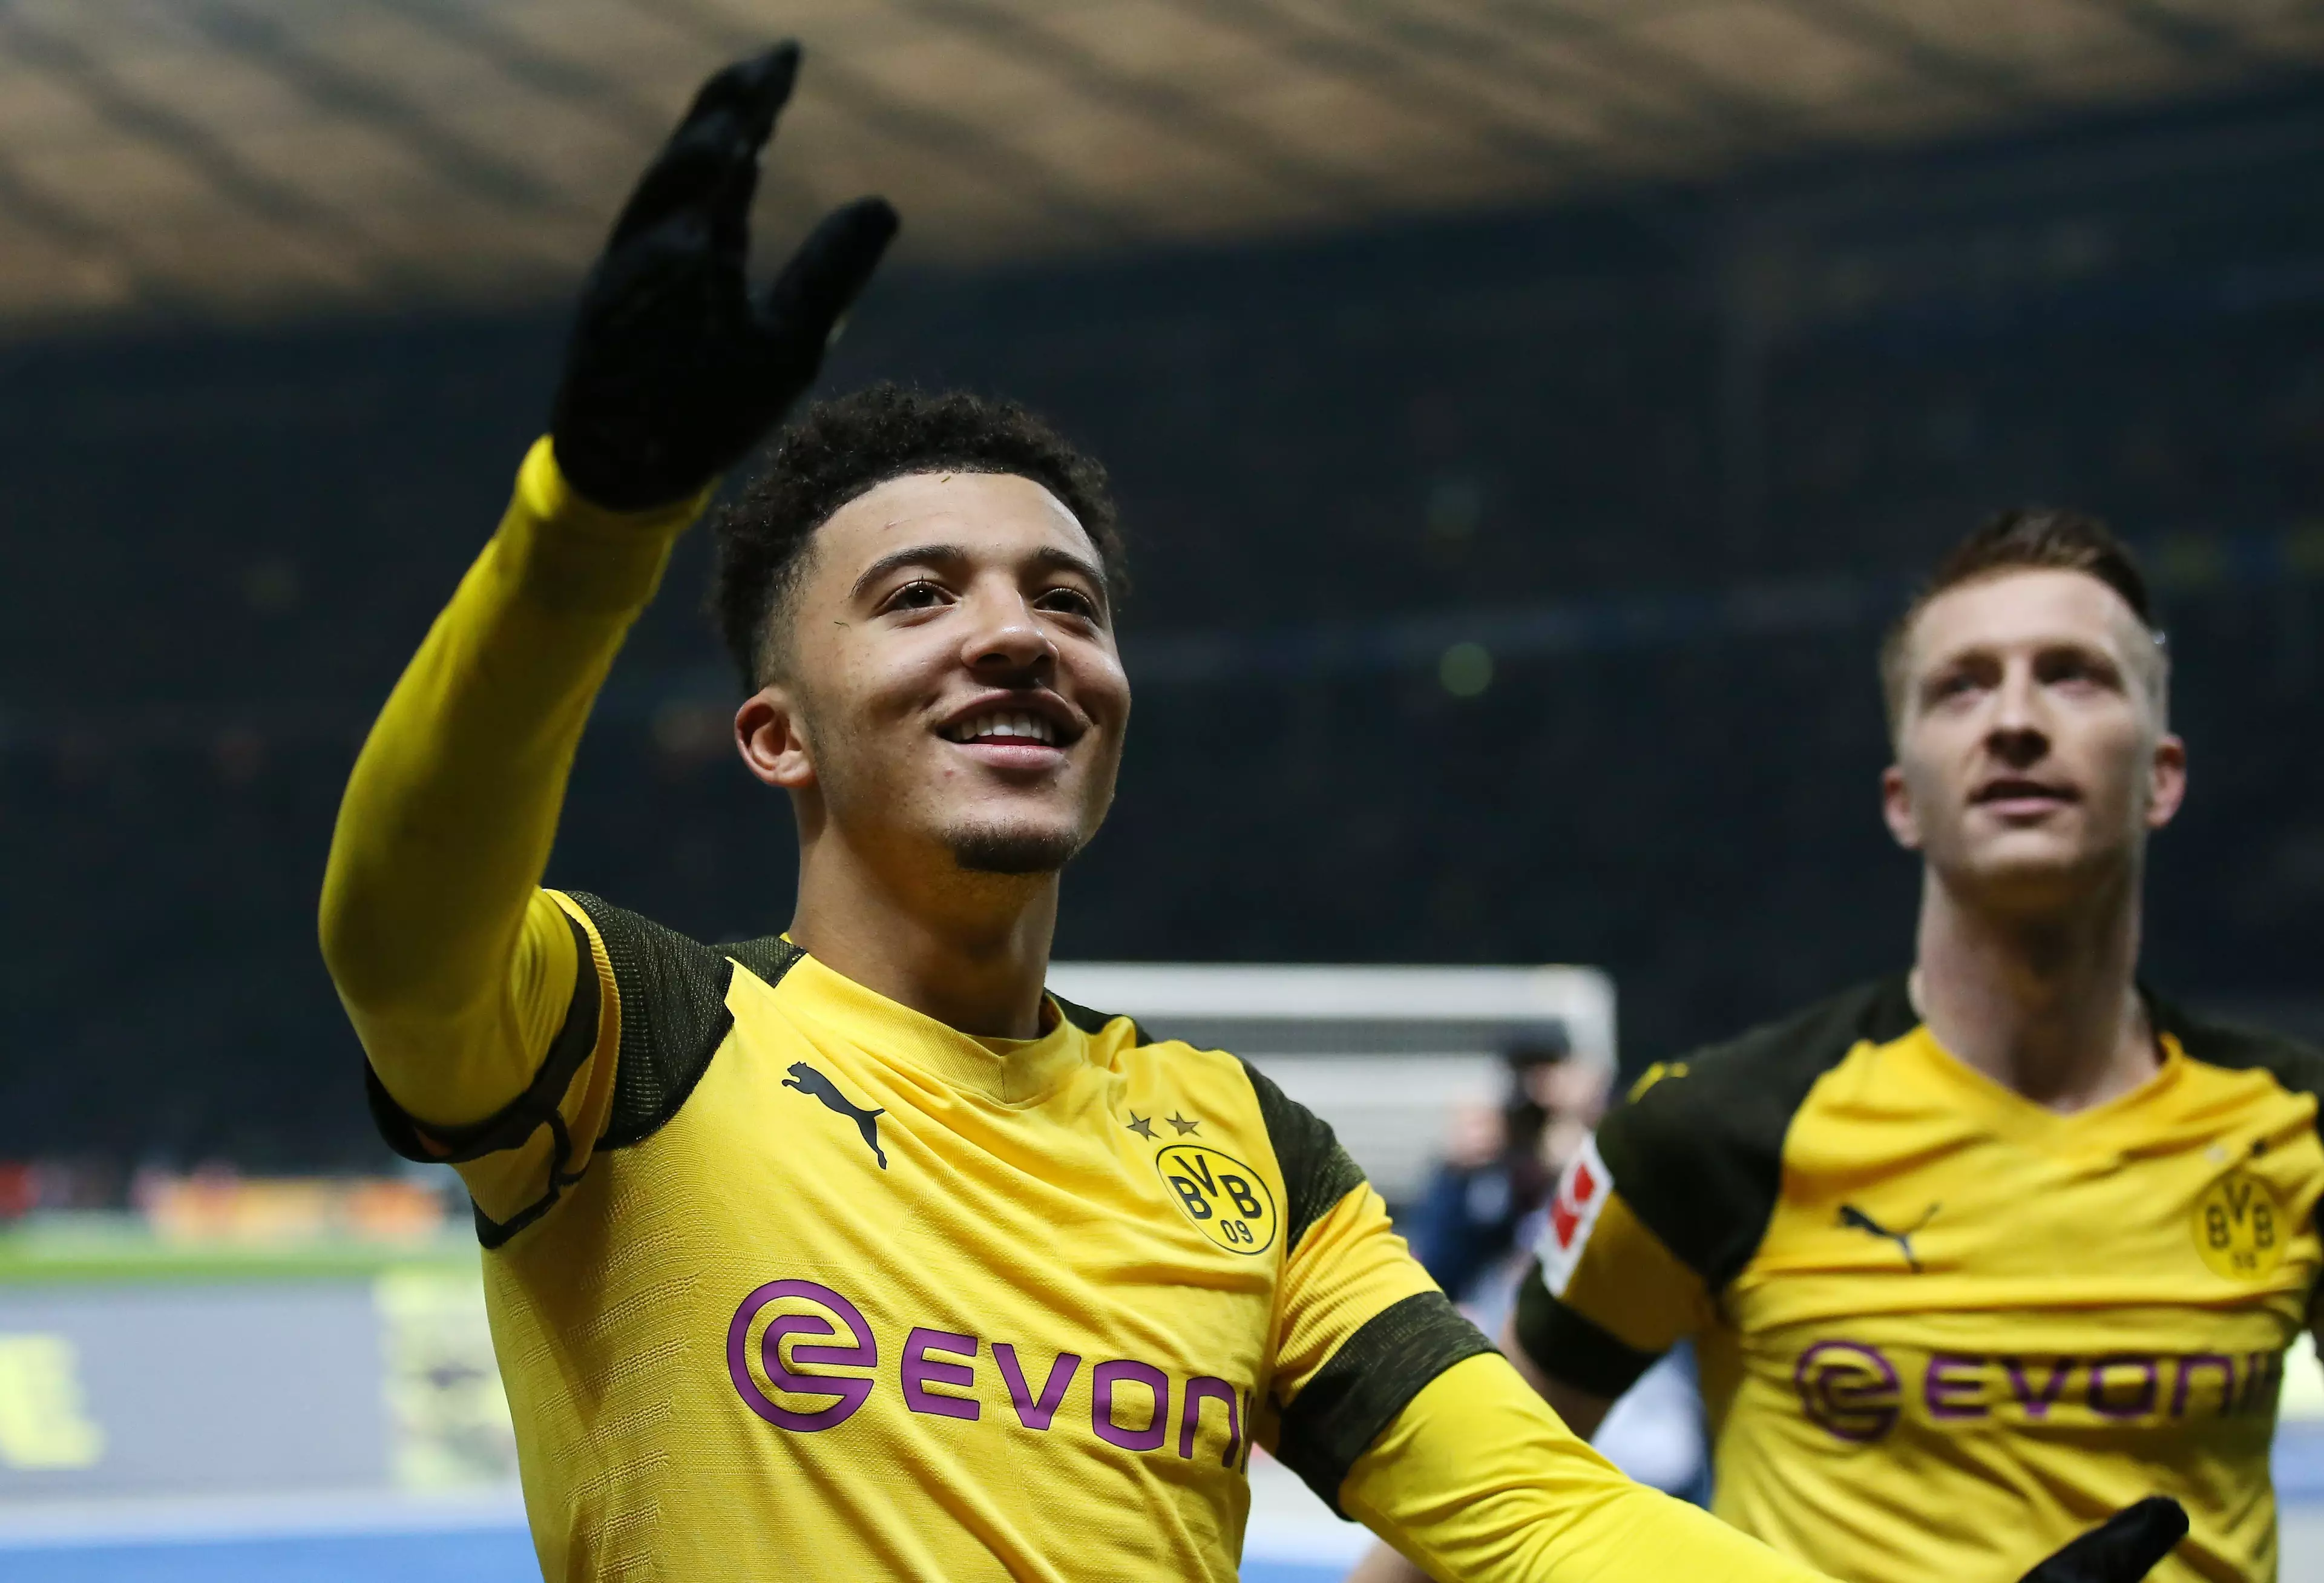 Sancho's form has made him a reported £100 million target for Manchester United. Image: PA Images